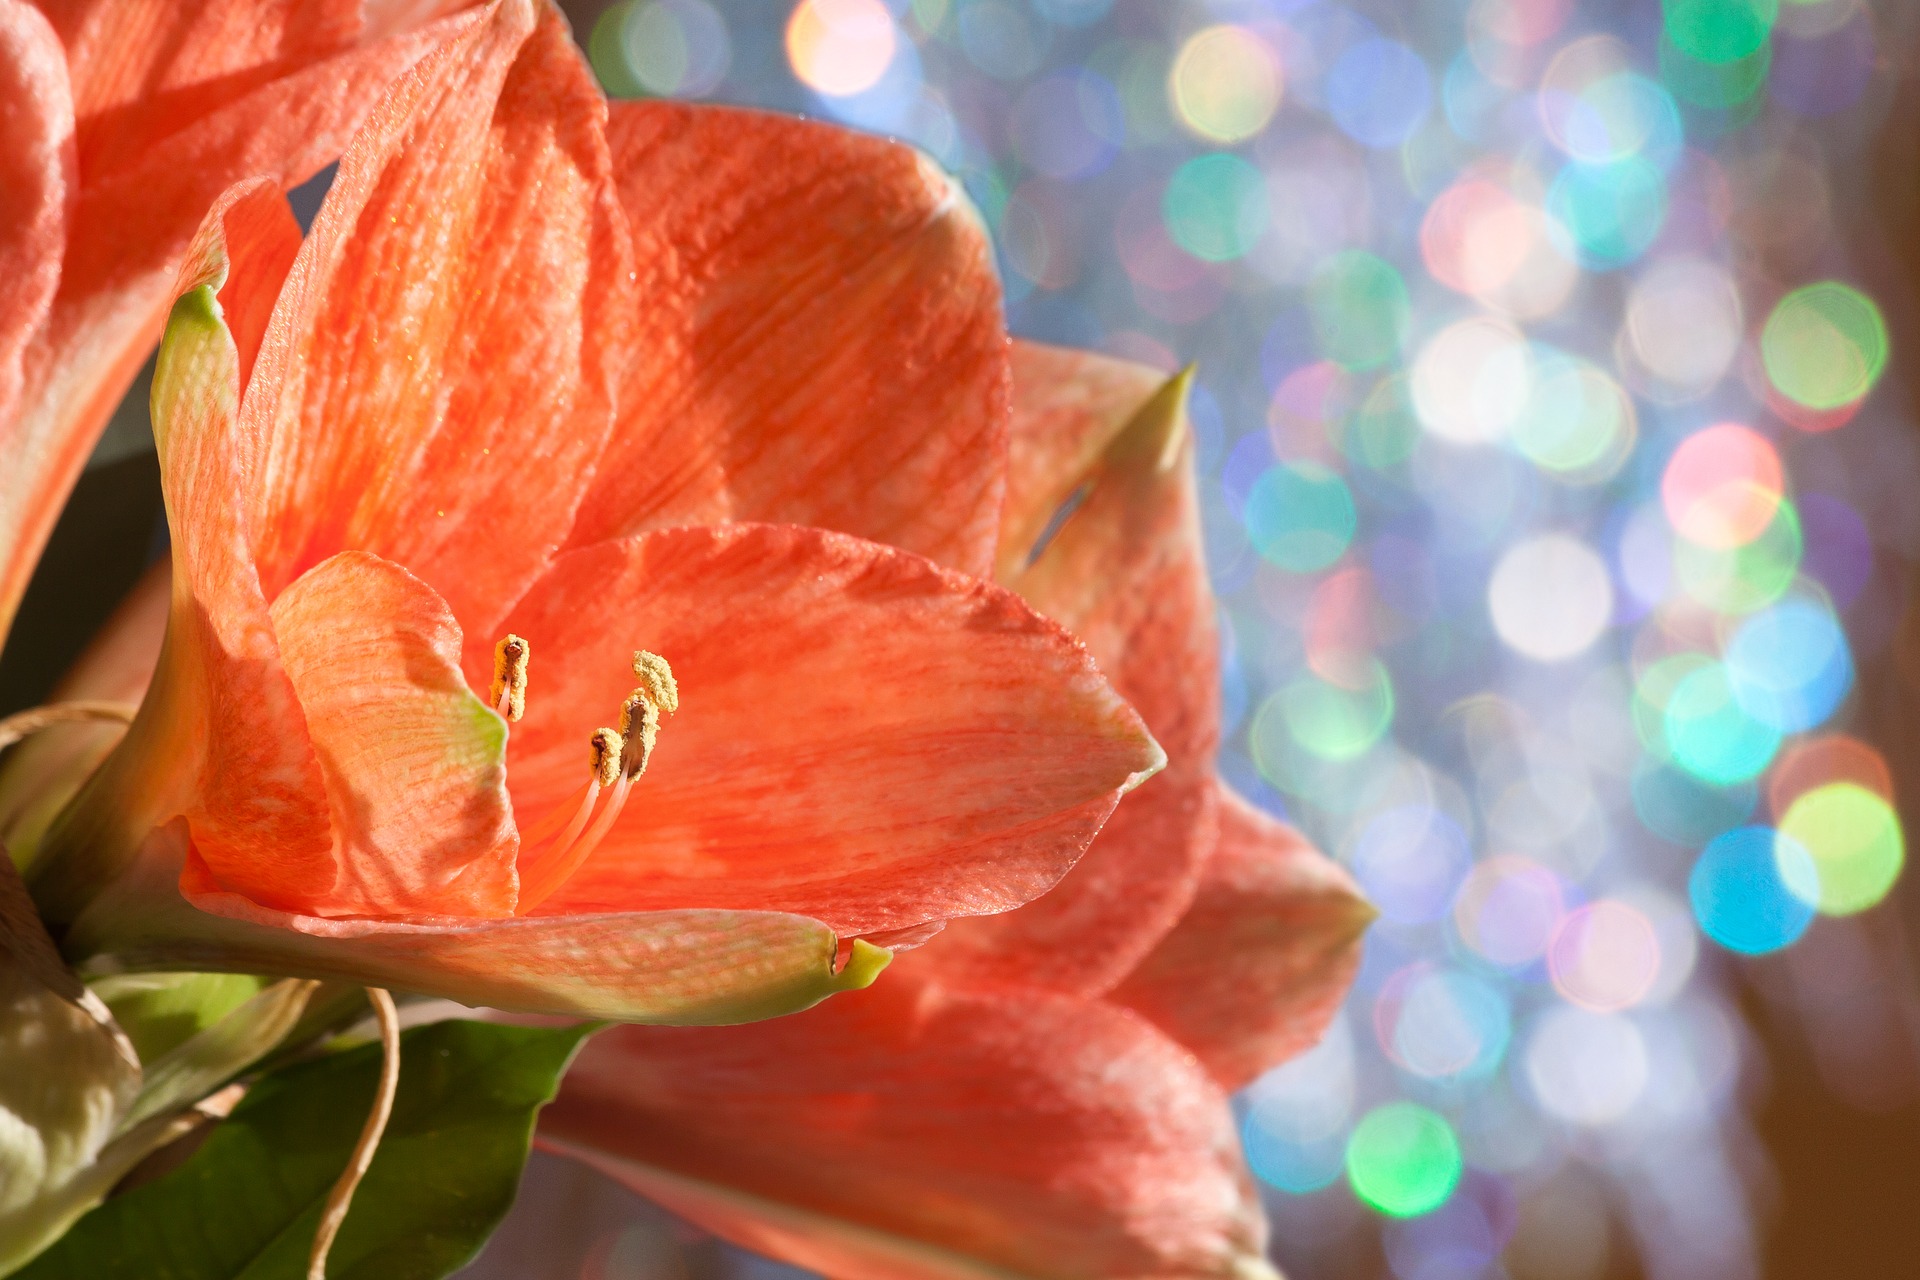 Amaryllis flower in front of lights